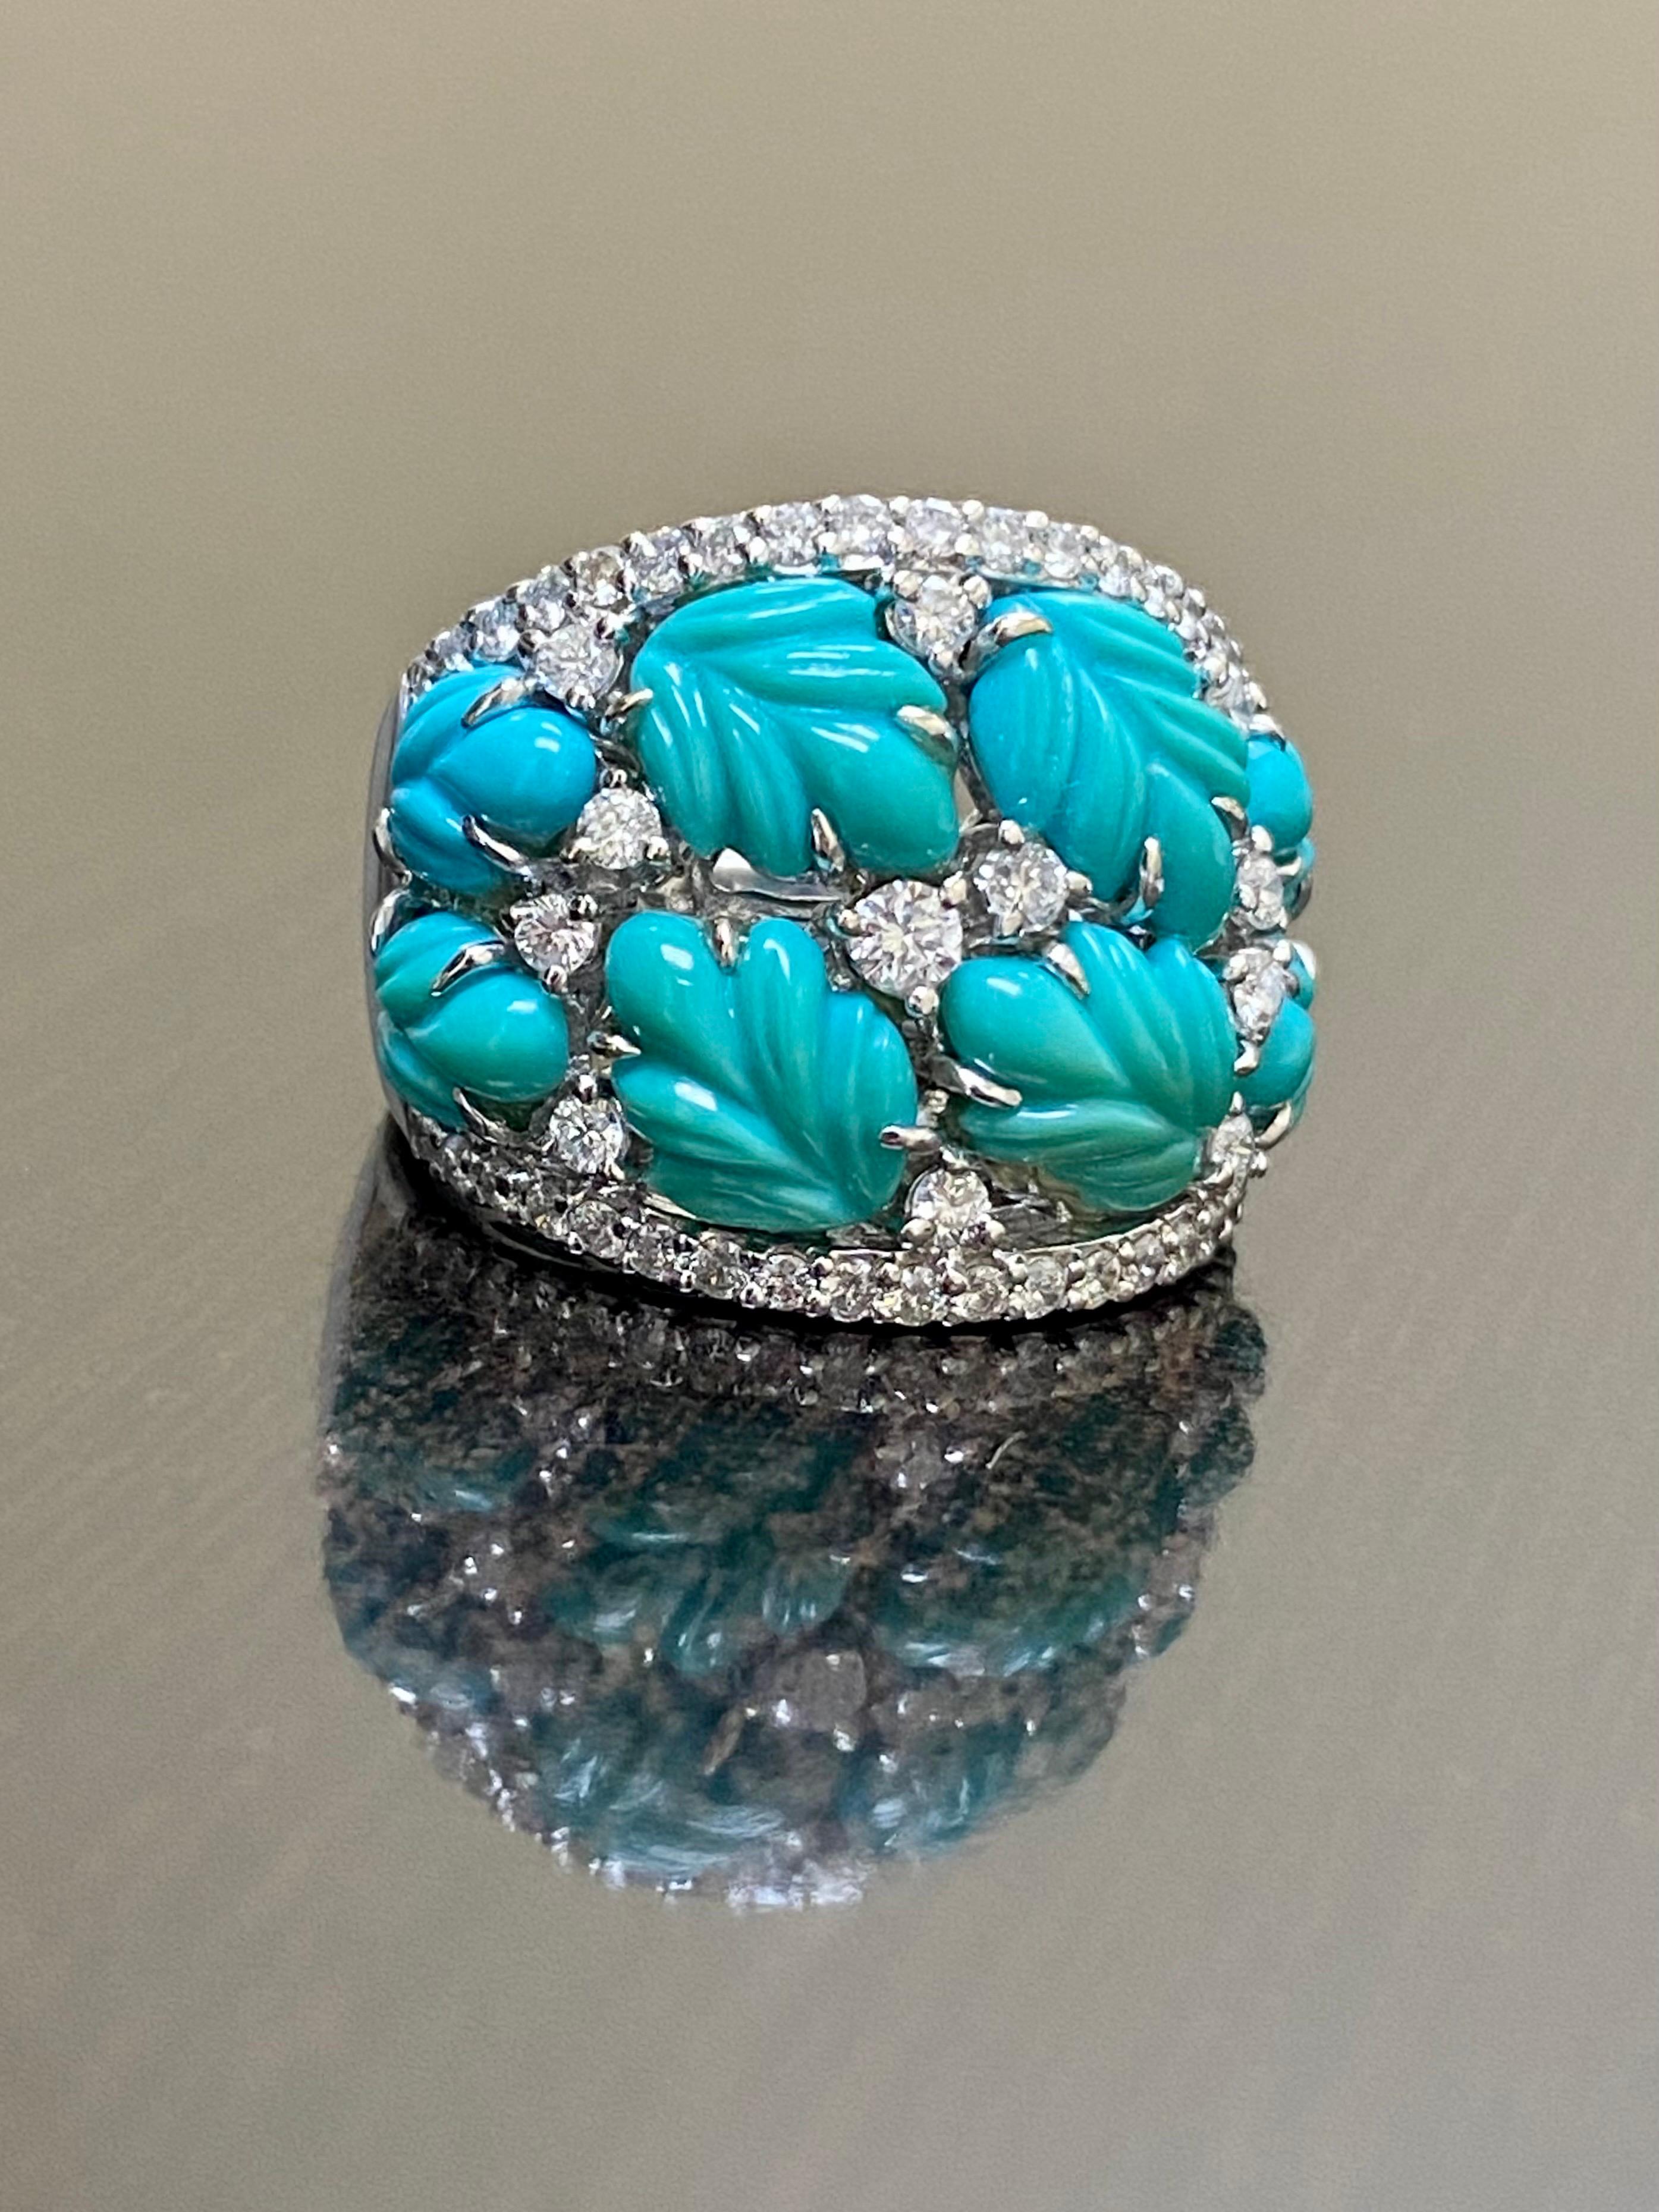 DeKara Design ONE OF A KIND COLLECTION

Metal-18K White Gold, .750.

Stones- Natural 8 Specially Cut Turquoise, 48 Round Diamonds F-G Color SI1 Clarity 0.86 Carats.  

Here is your chance to have a piece of art on your hand! 
 Specially made 18K